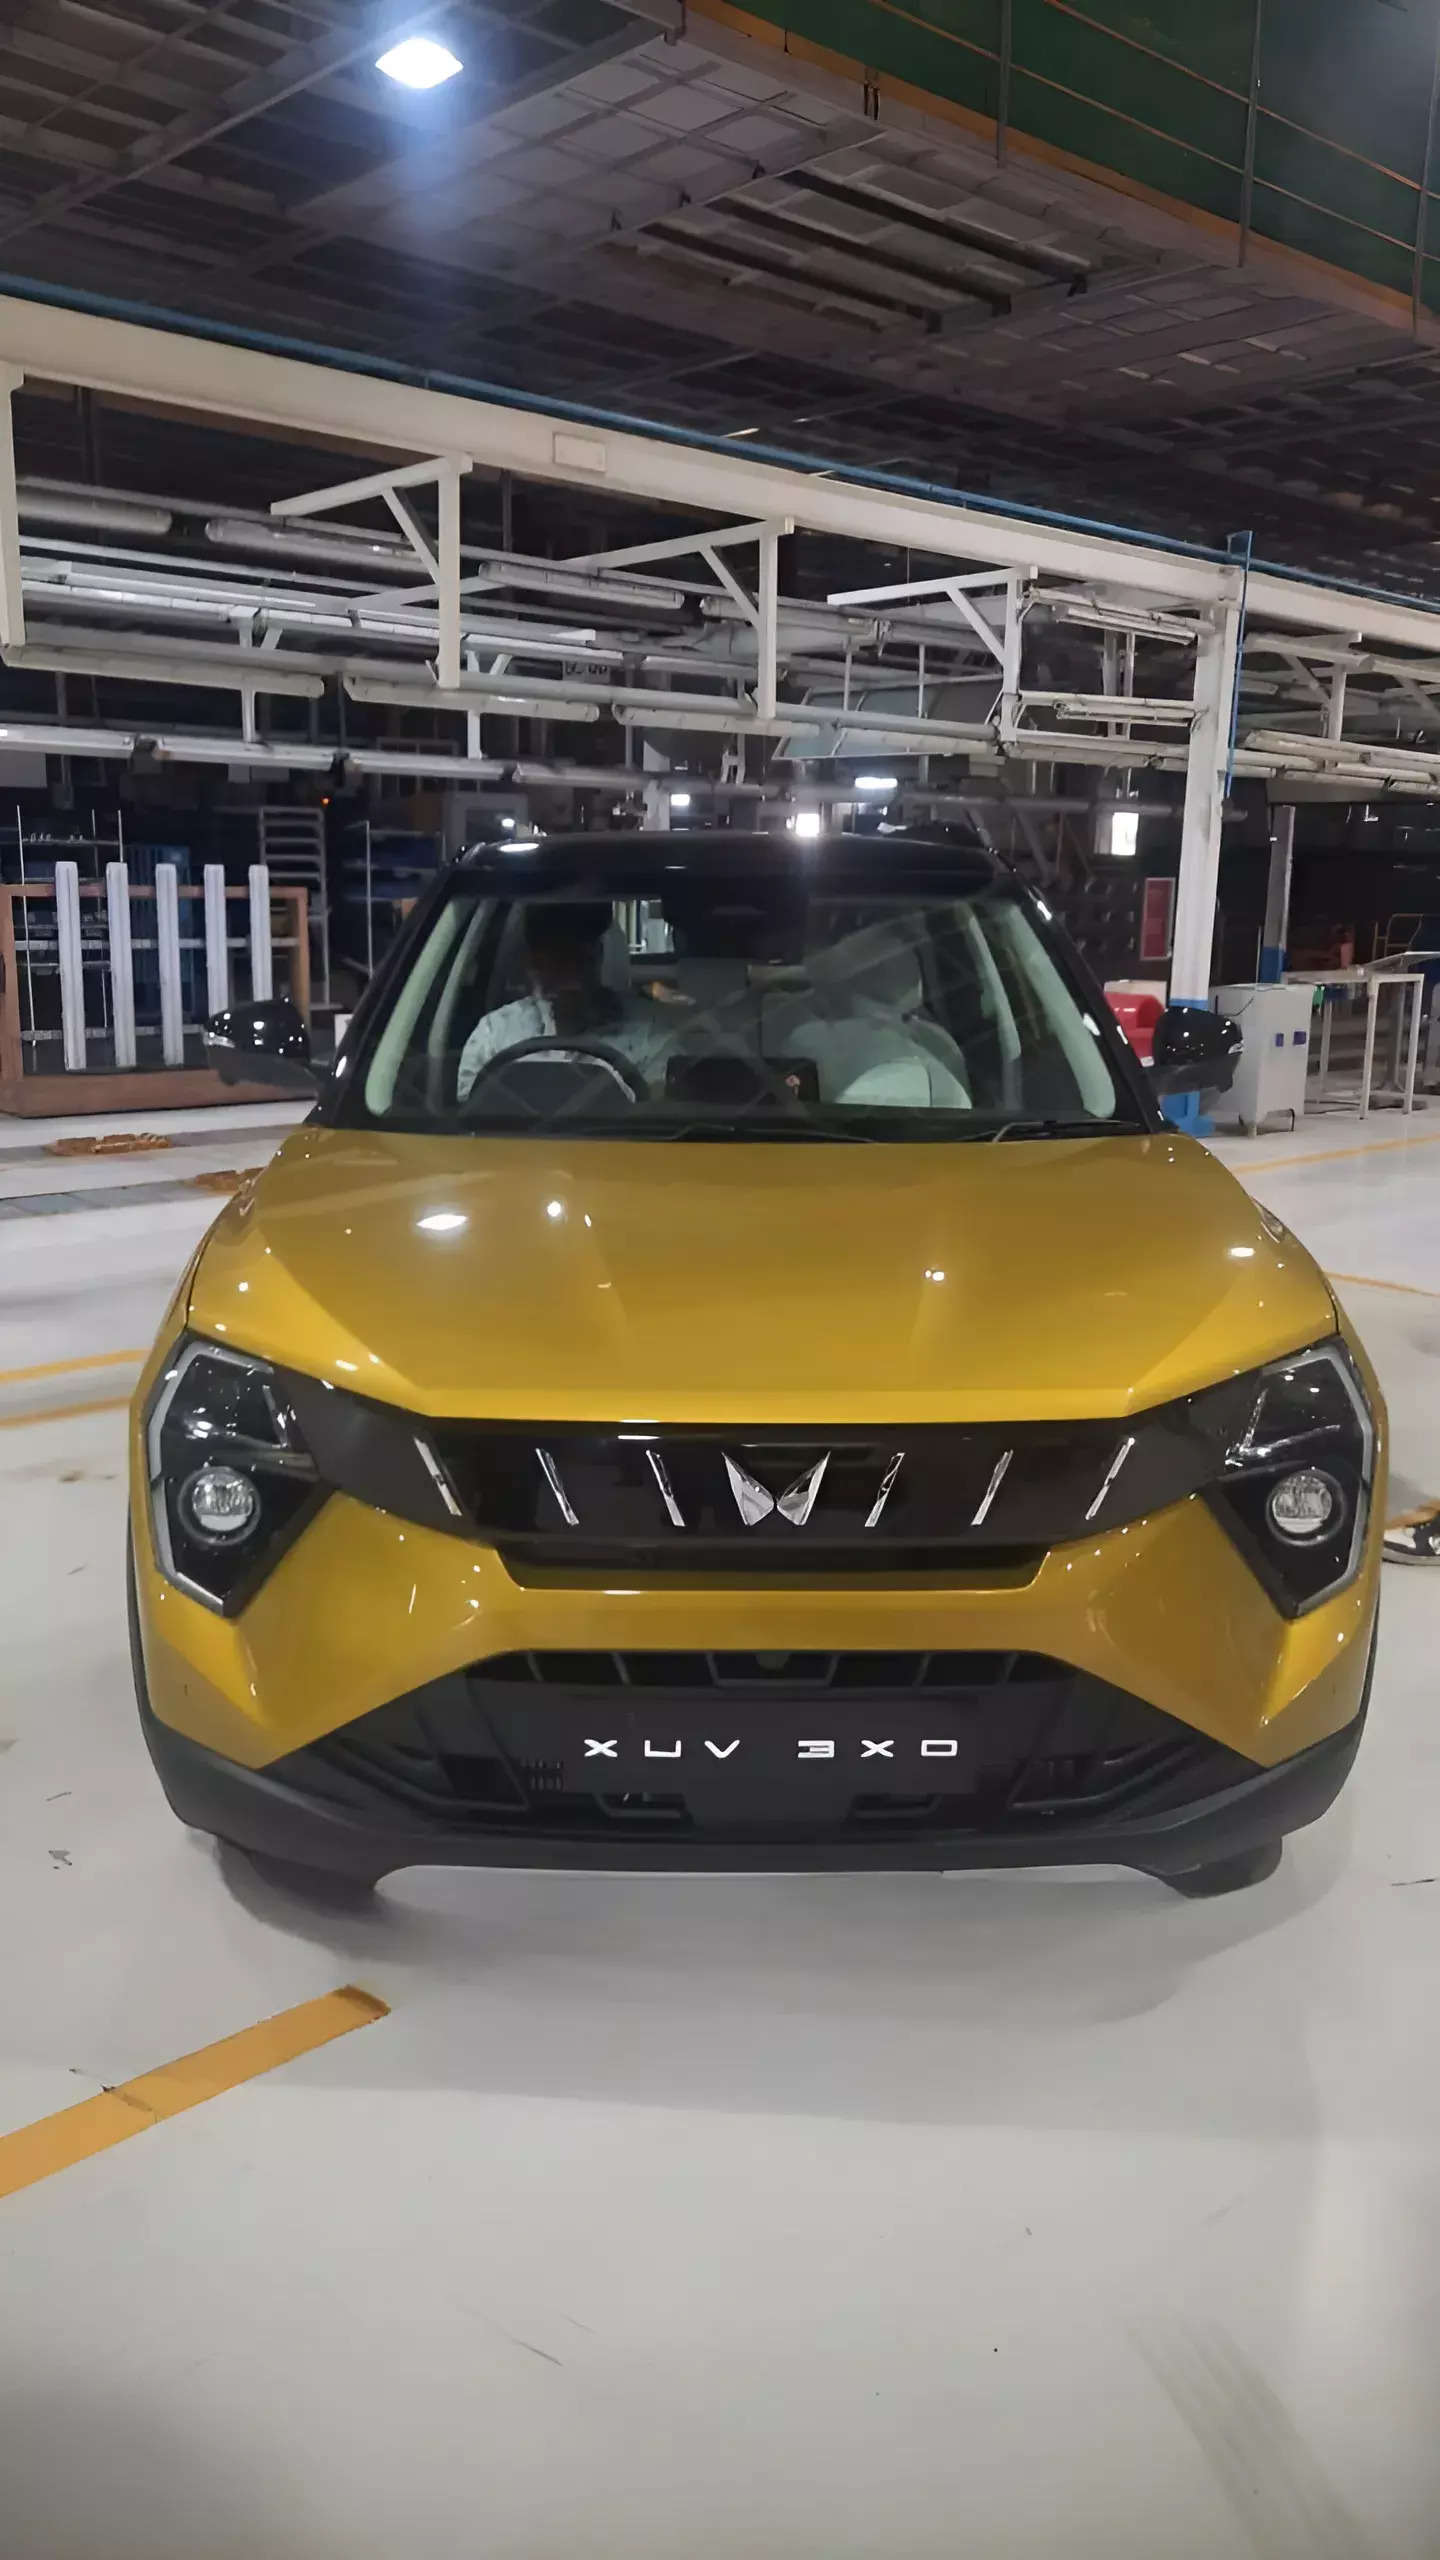 <p>The 3XO was conceptualised at the Mahindra India Design Studio (MIDS) in Mumbai, and engineered and developed at the Mahindra Research Valley (MRV) near Chennai.</p>